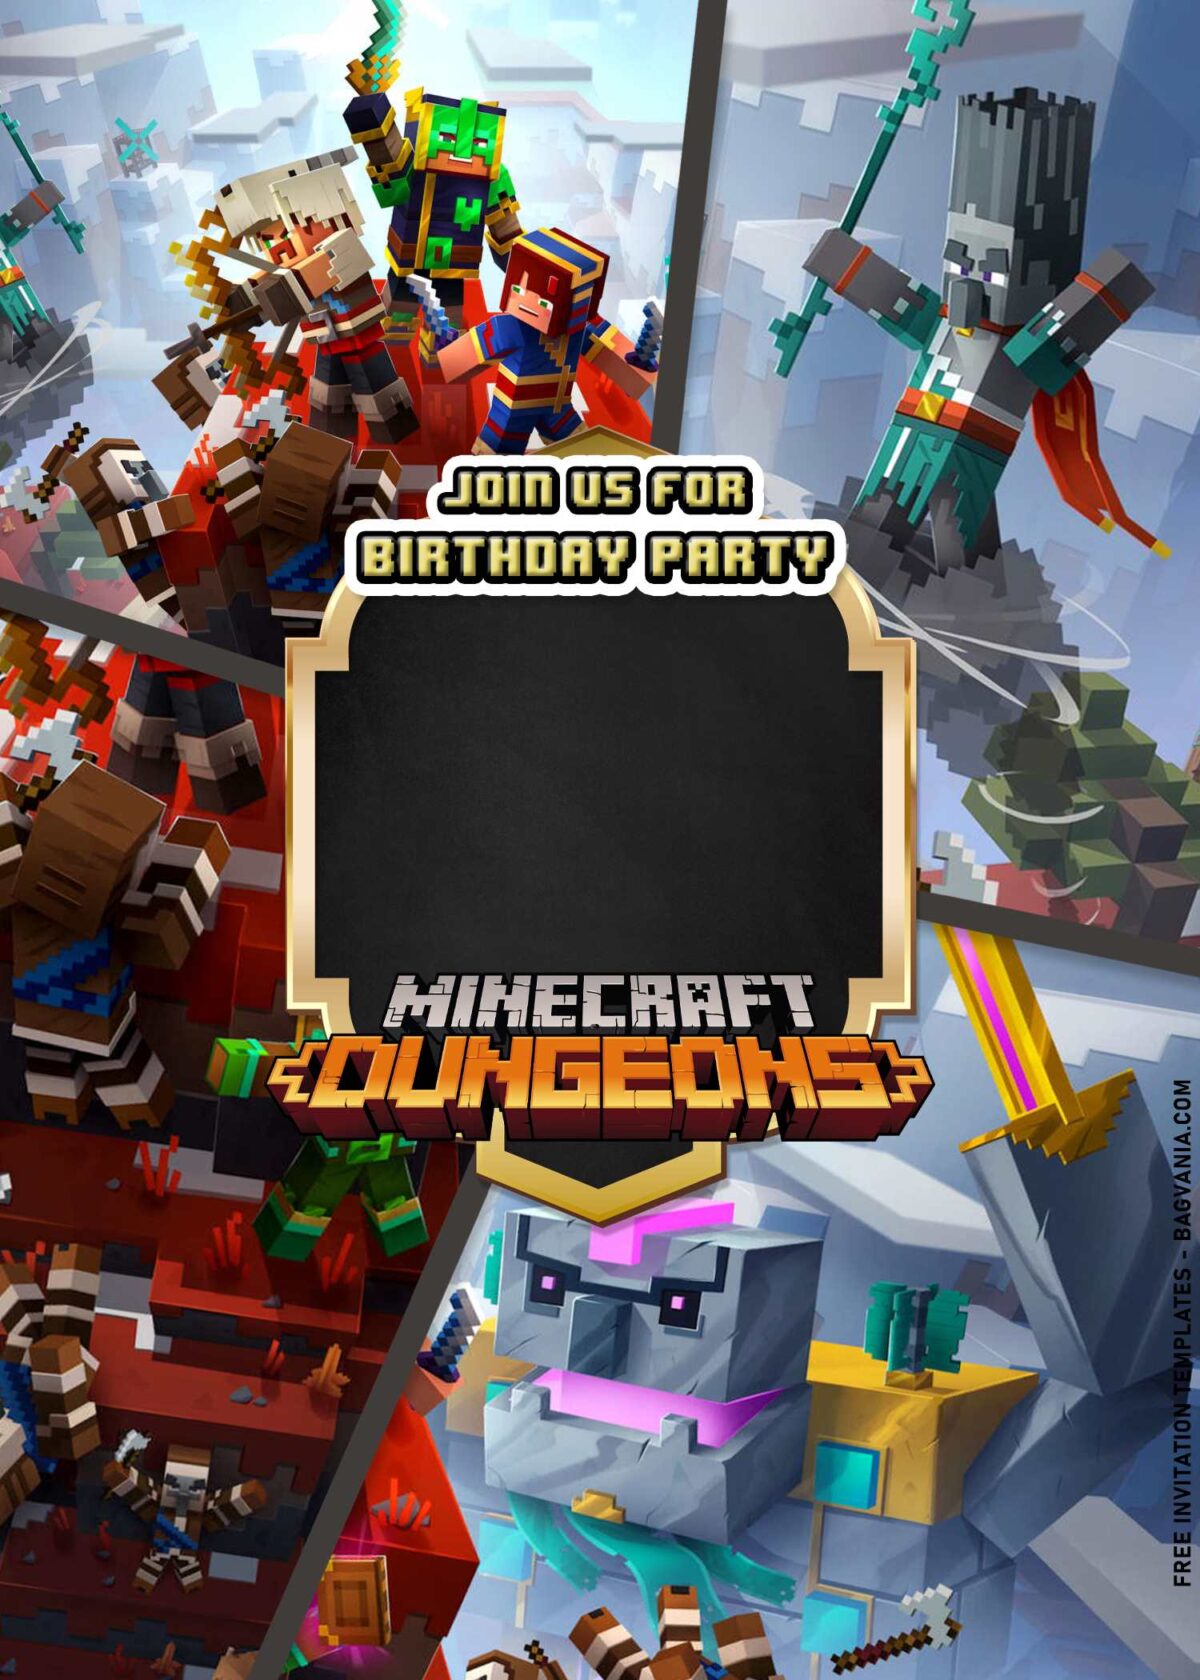 7+ Epic Minecraft Birthday Invitation Templates For Boys Birthday with Minecraft Dungeon and Jungle Awakens Characters and scene